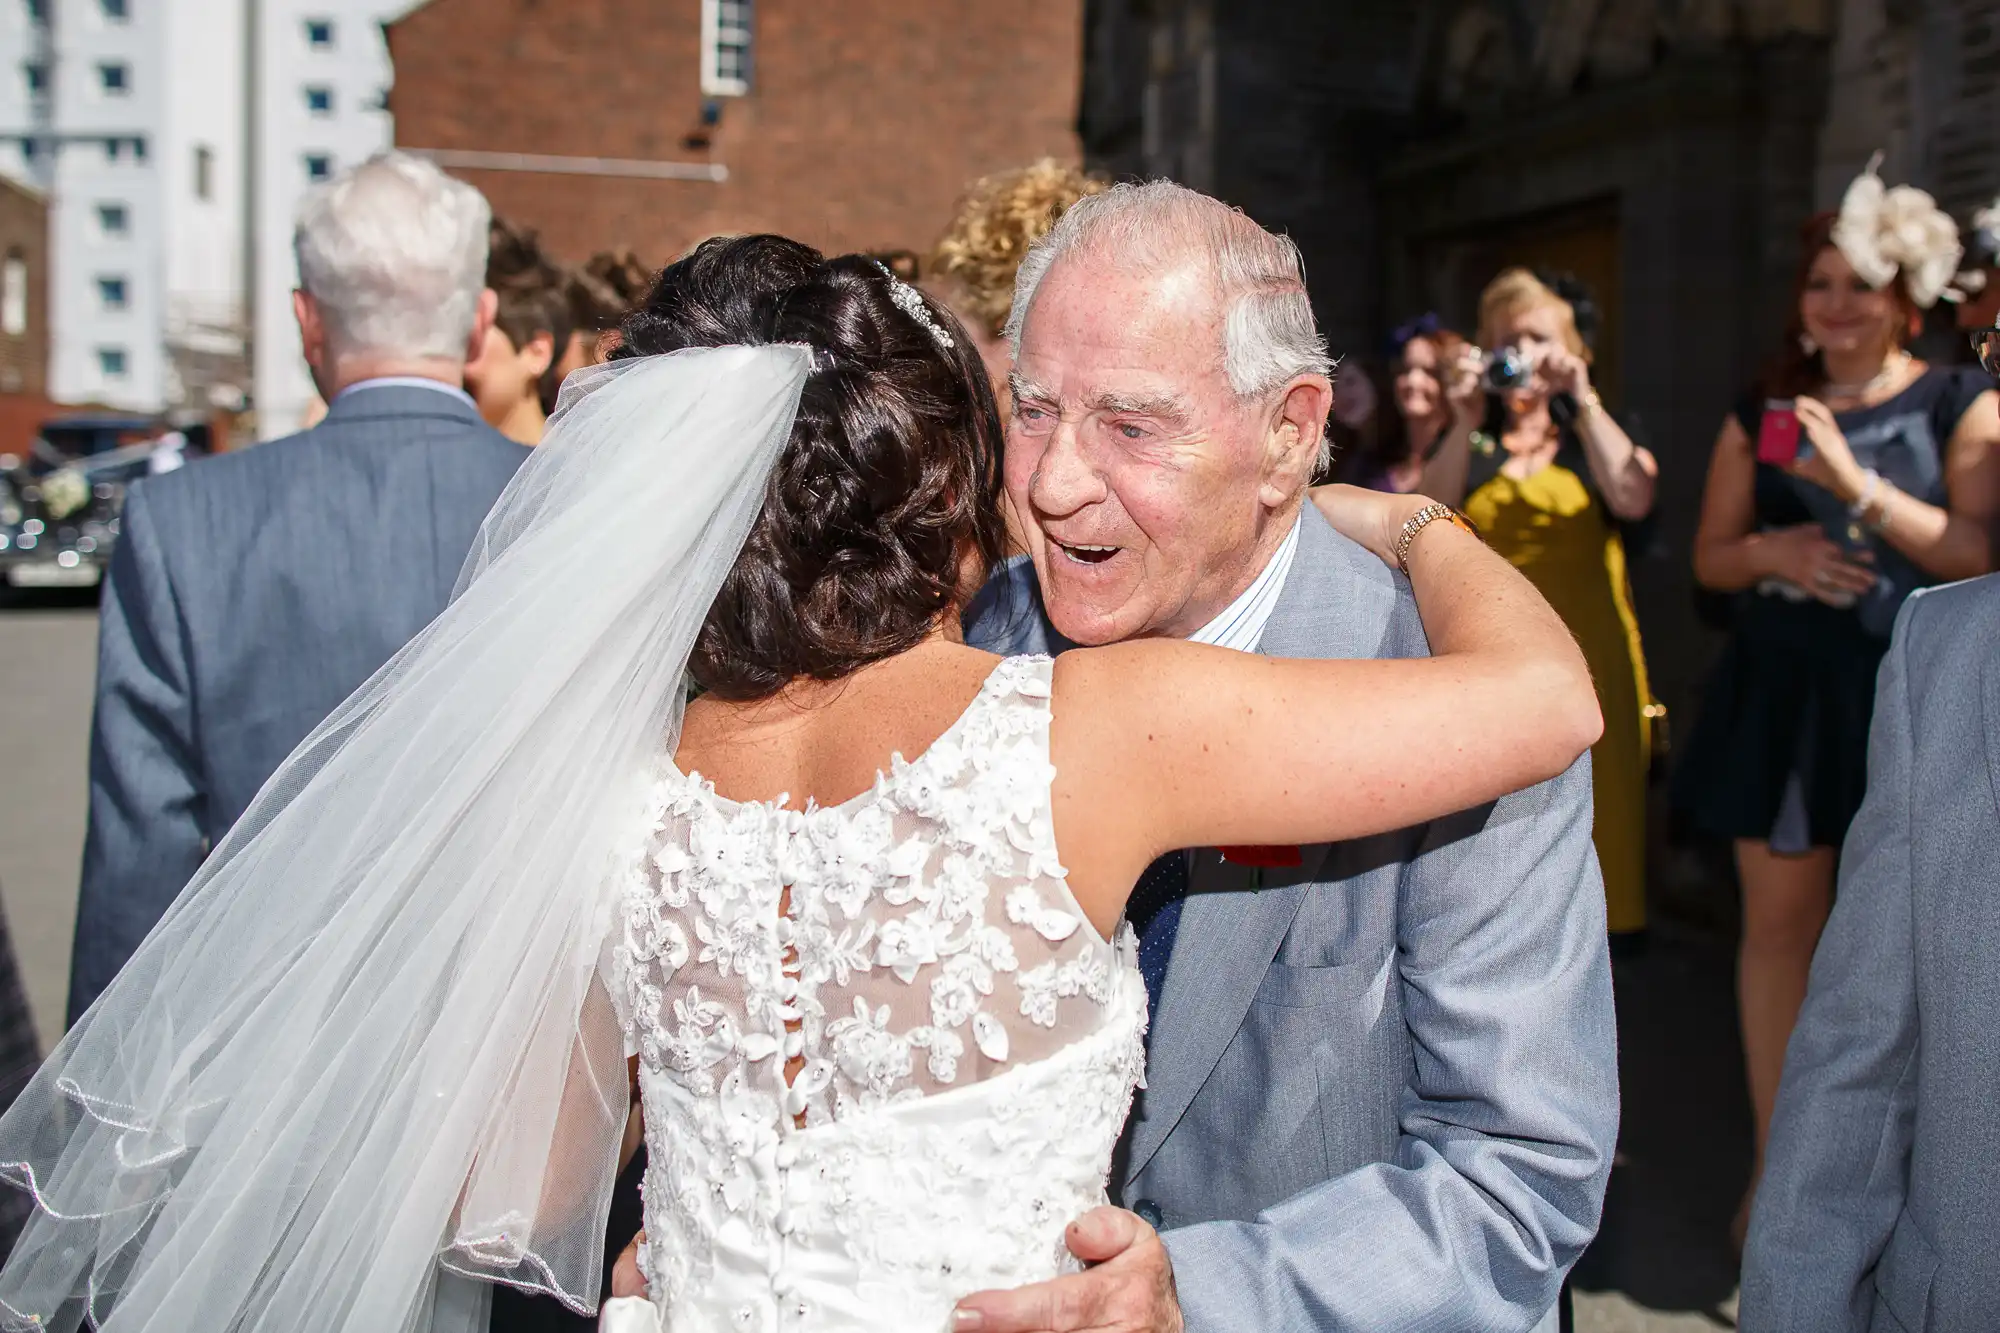 A bride in a white lace gown hugs an elderly man with joy at a sunny outdoor wedding ceremony, surrounded by guests.